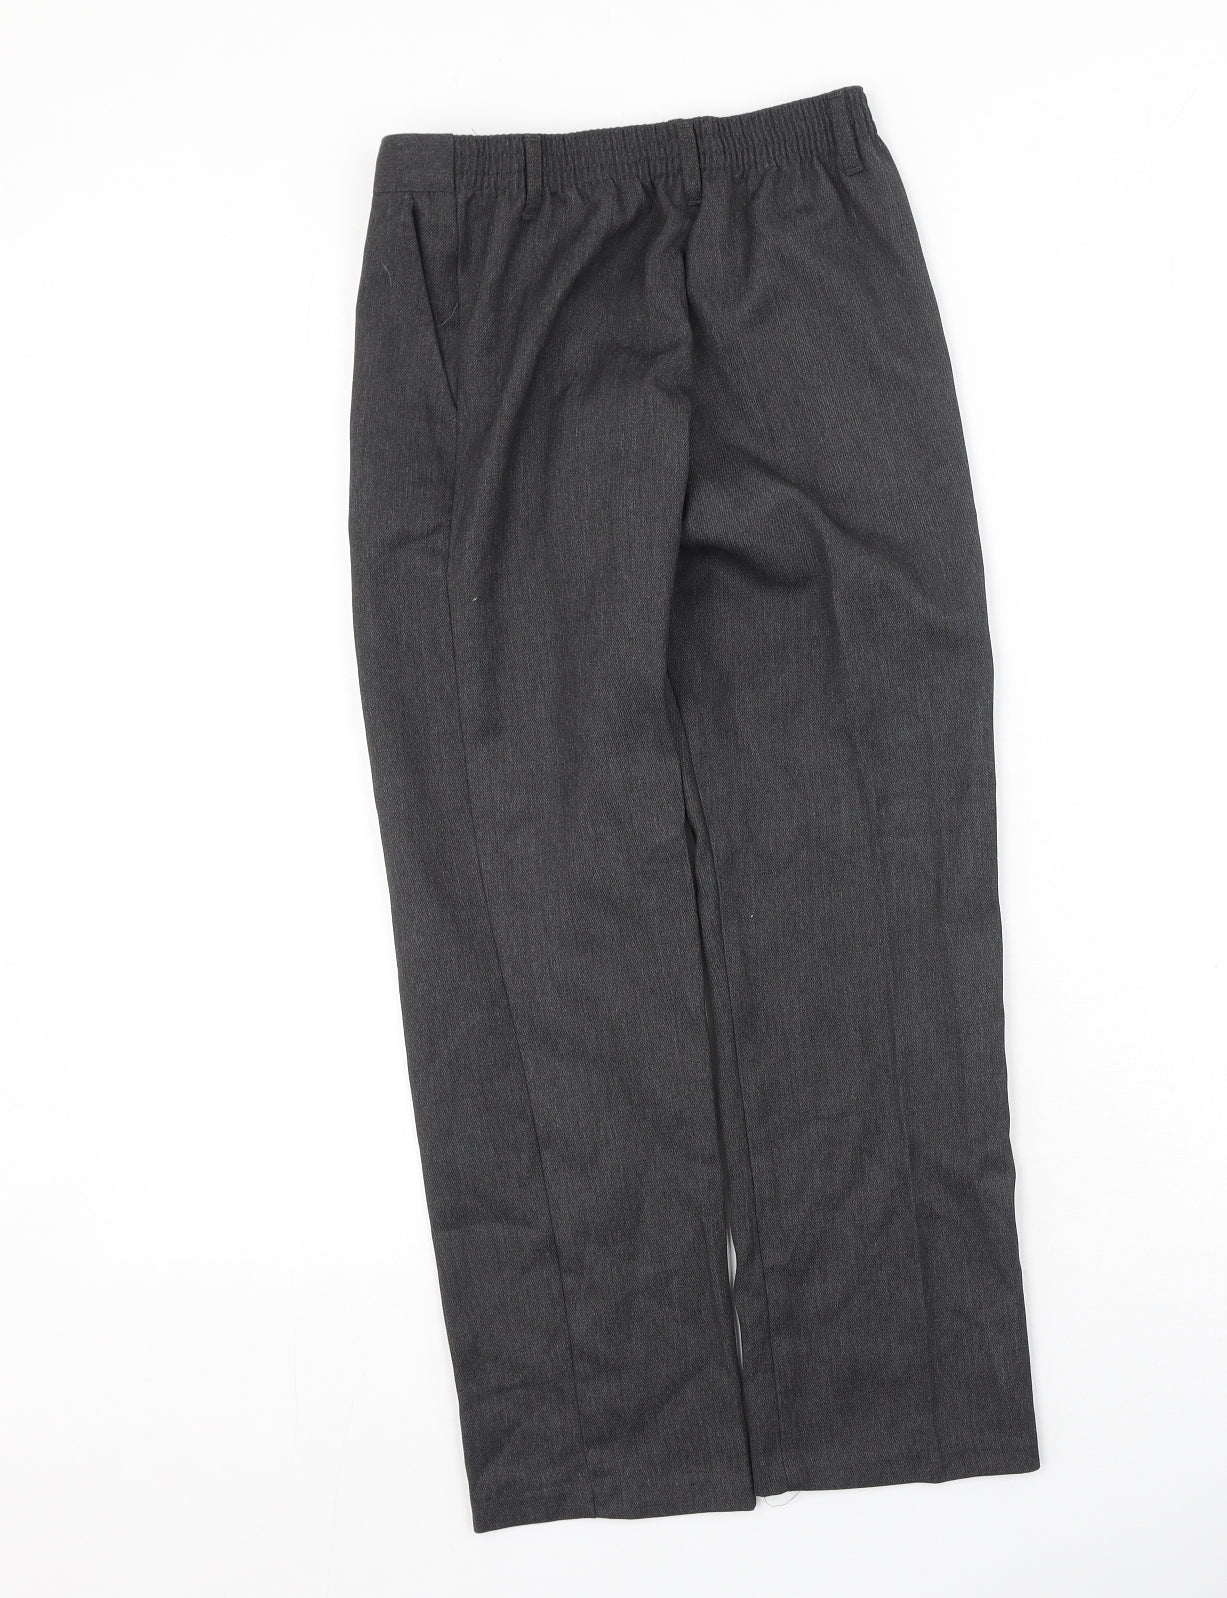 George Boys   Polyester Dress Pants Trousers Size 8-9 Years  Regular